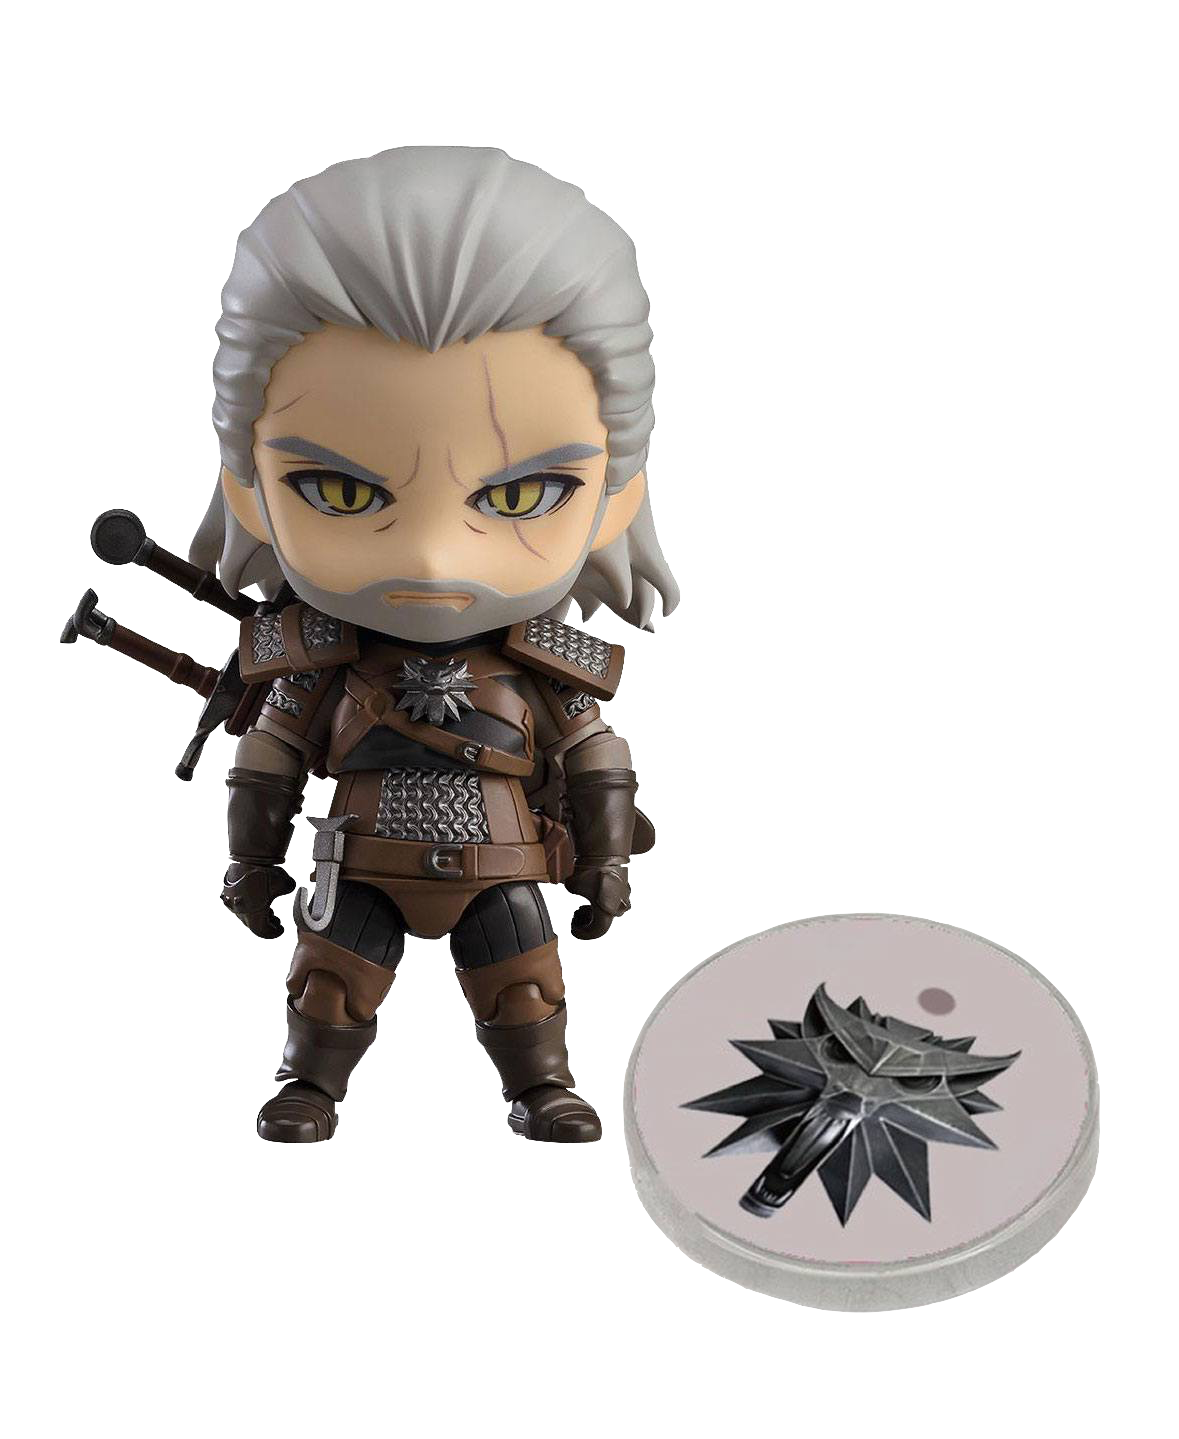 good-smile-company-the-witcher-geralt-of-rivia-nendoroid-exclusive-figure-toyslife